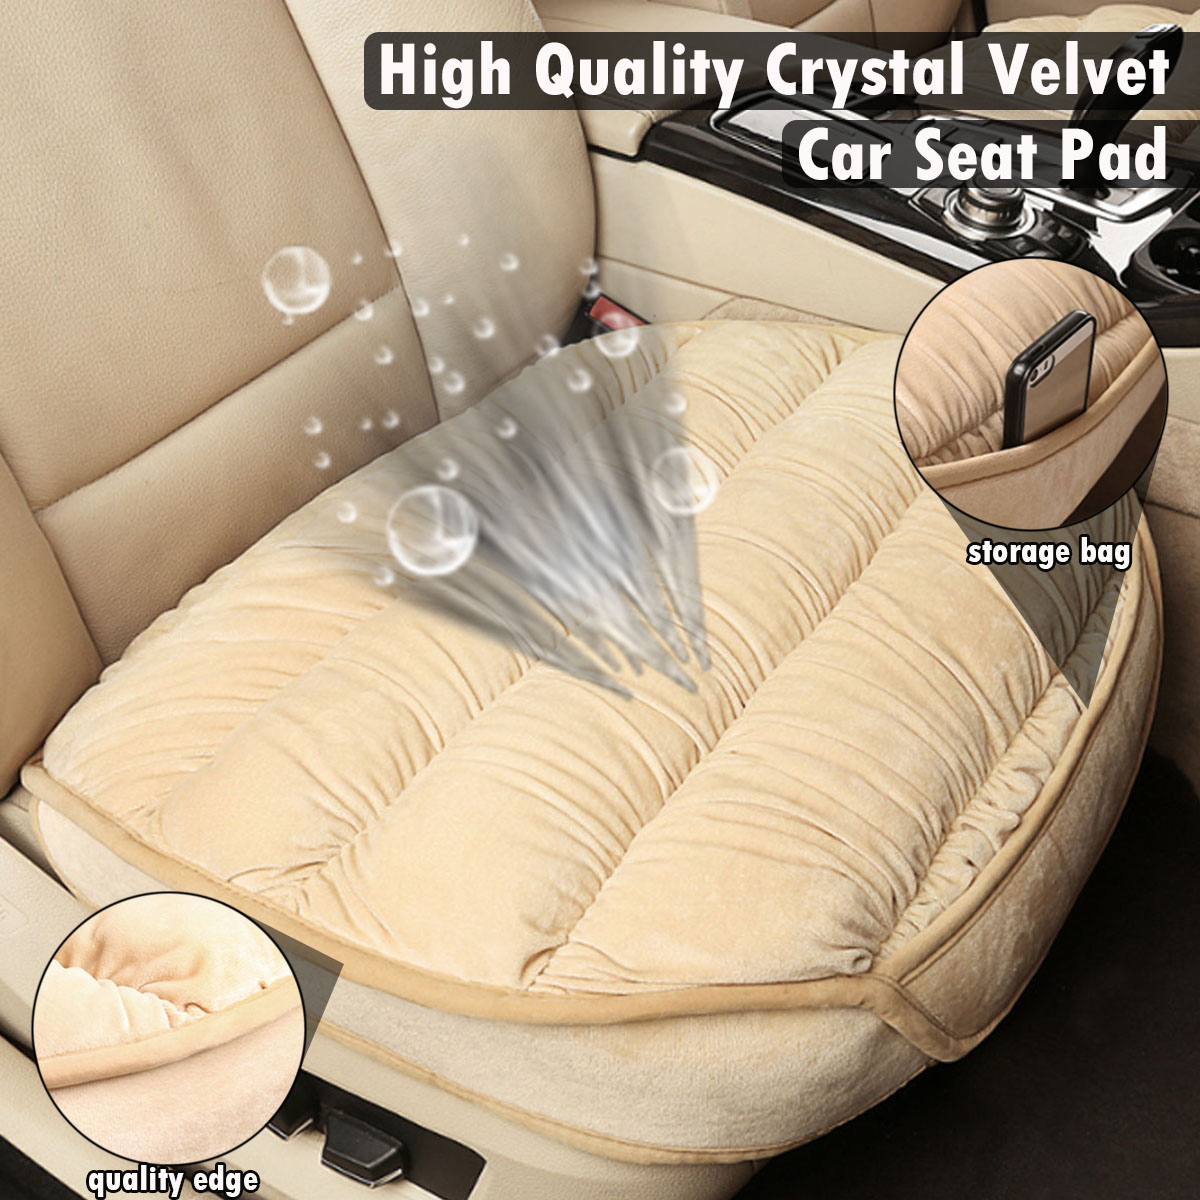 Universal-Car-Front-Seat-Cover-Soft-Plush-Breathable-Pads-Winter-Chair-Cushion-1628307-1